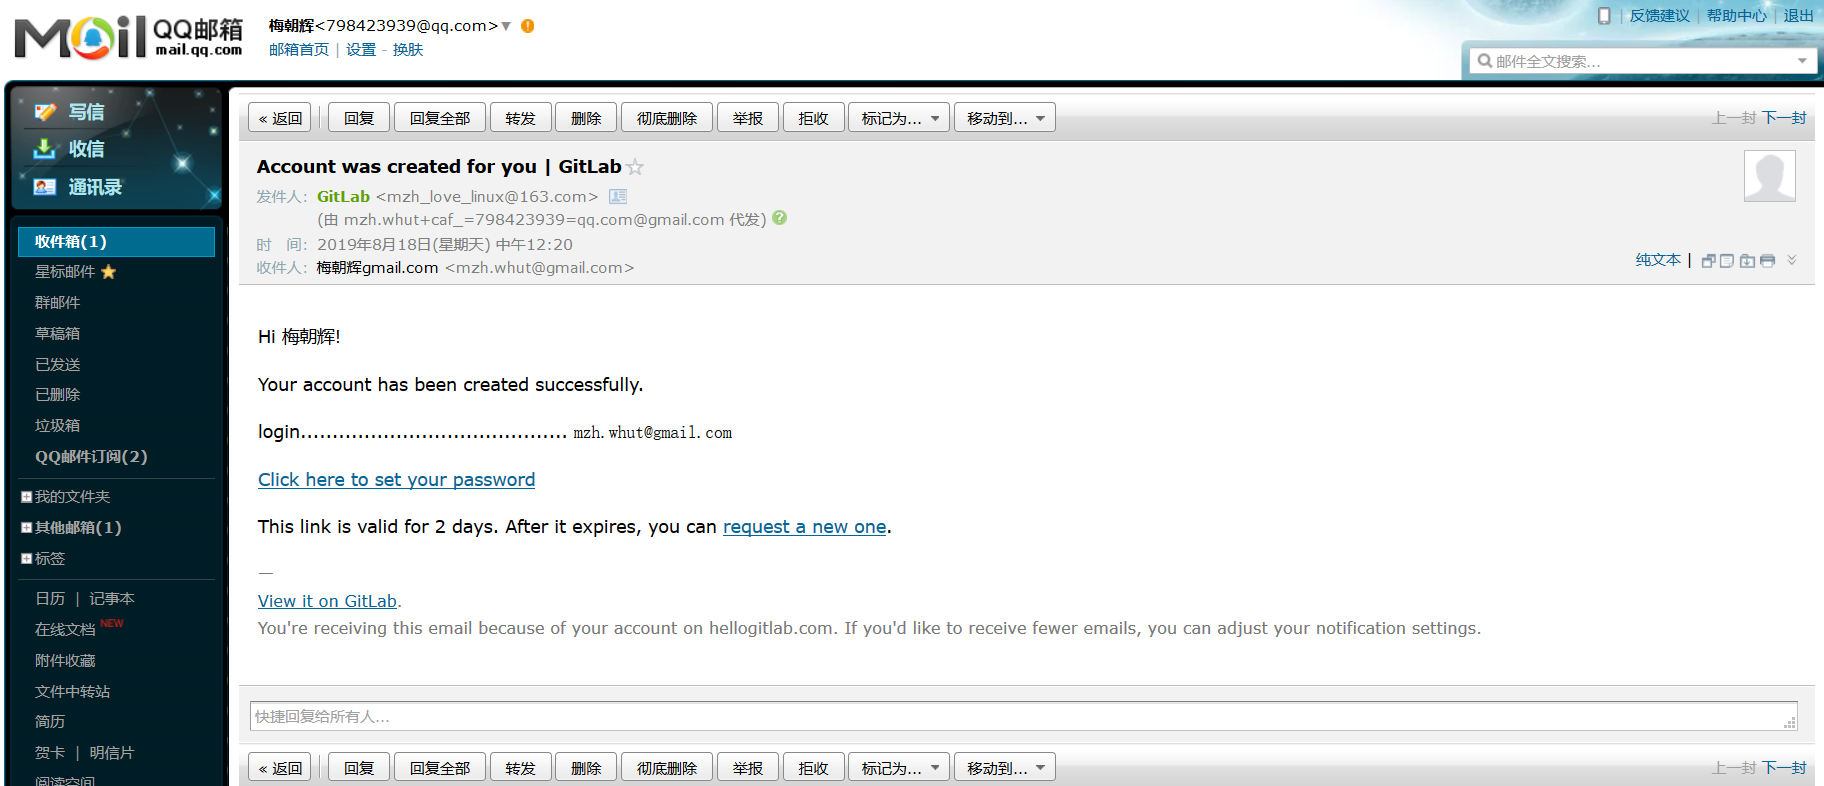 _images/gitlab_domain_account_was_created_for_you_email.png